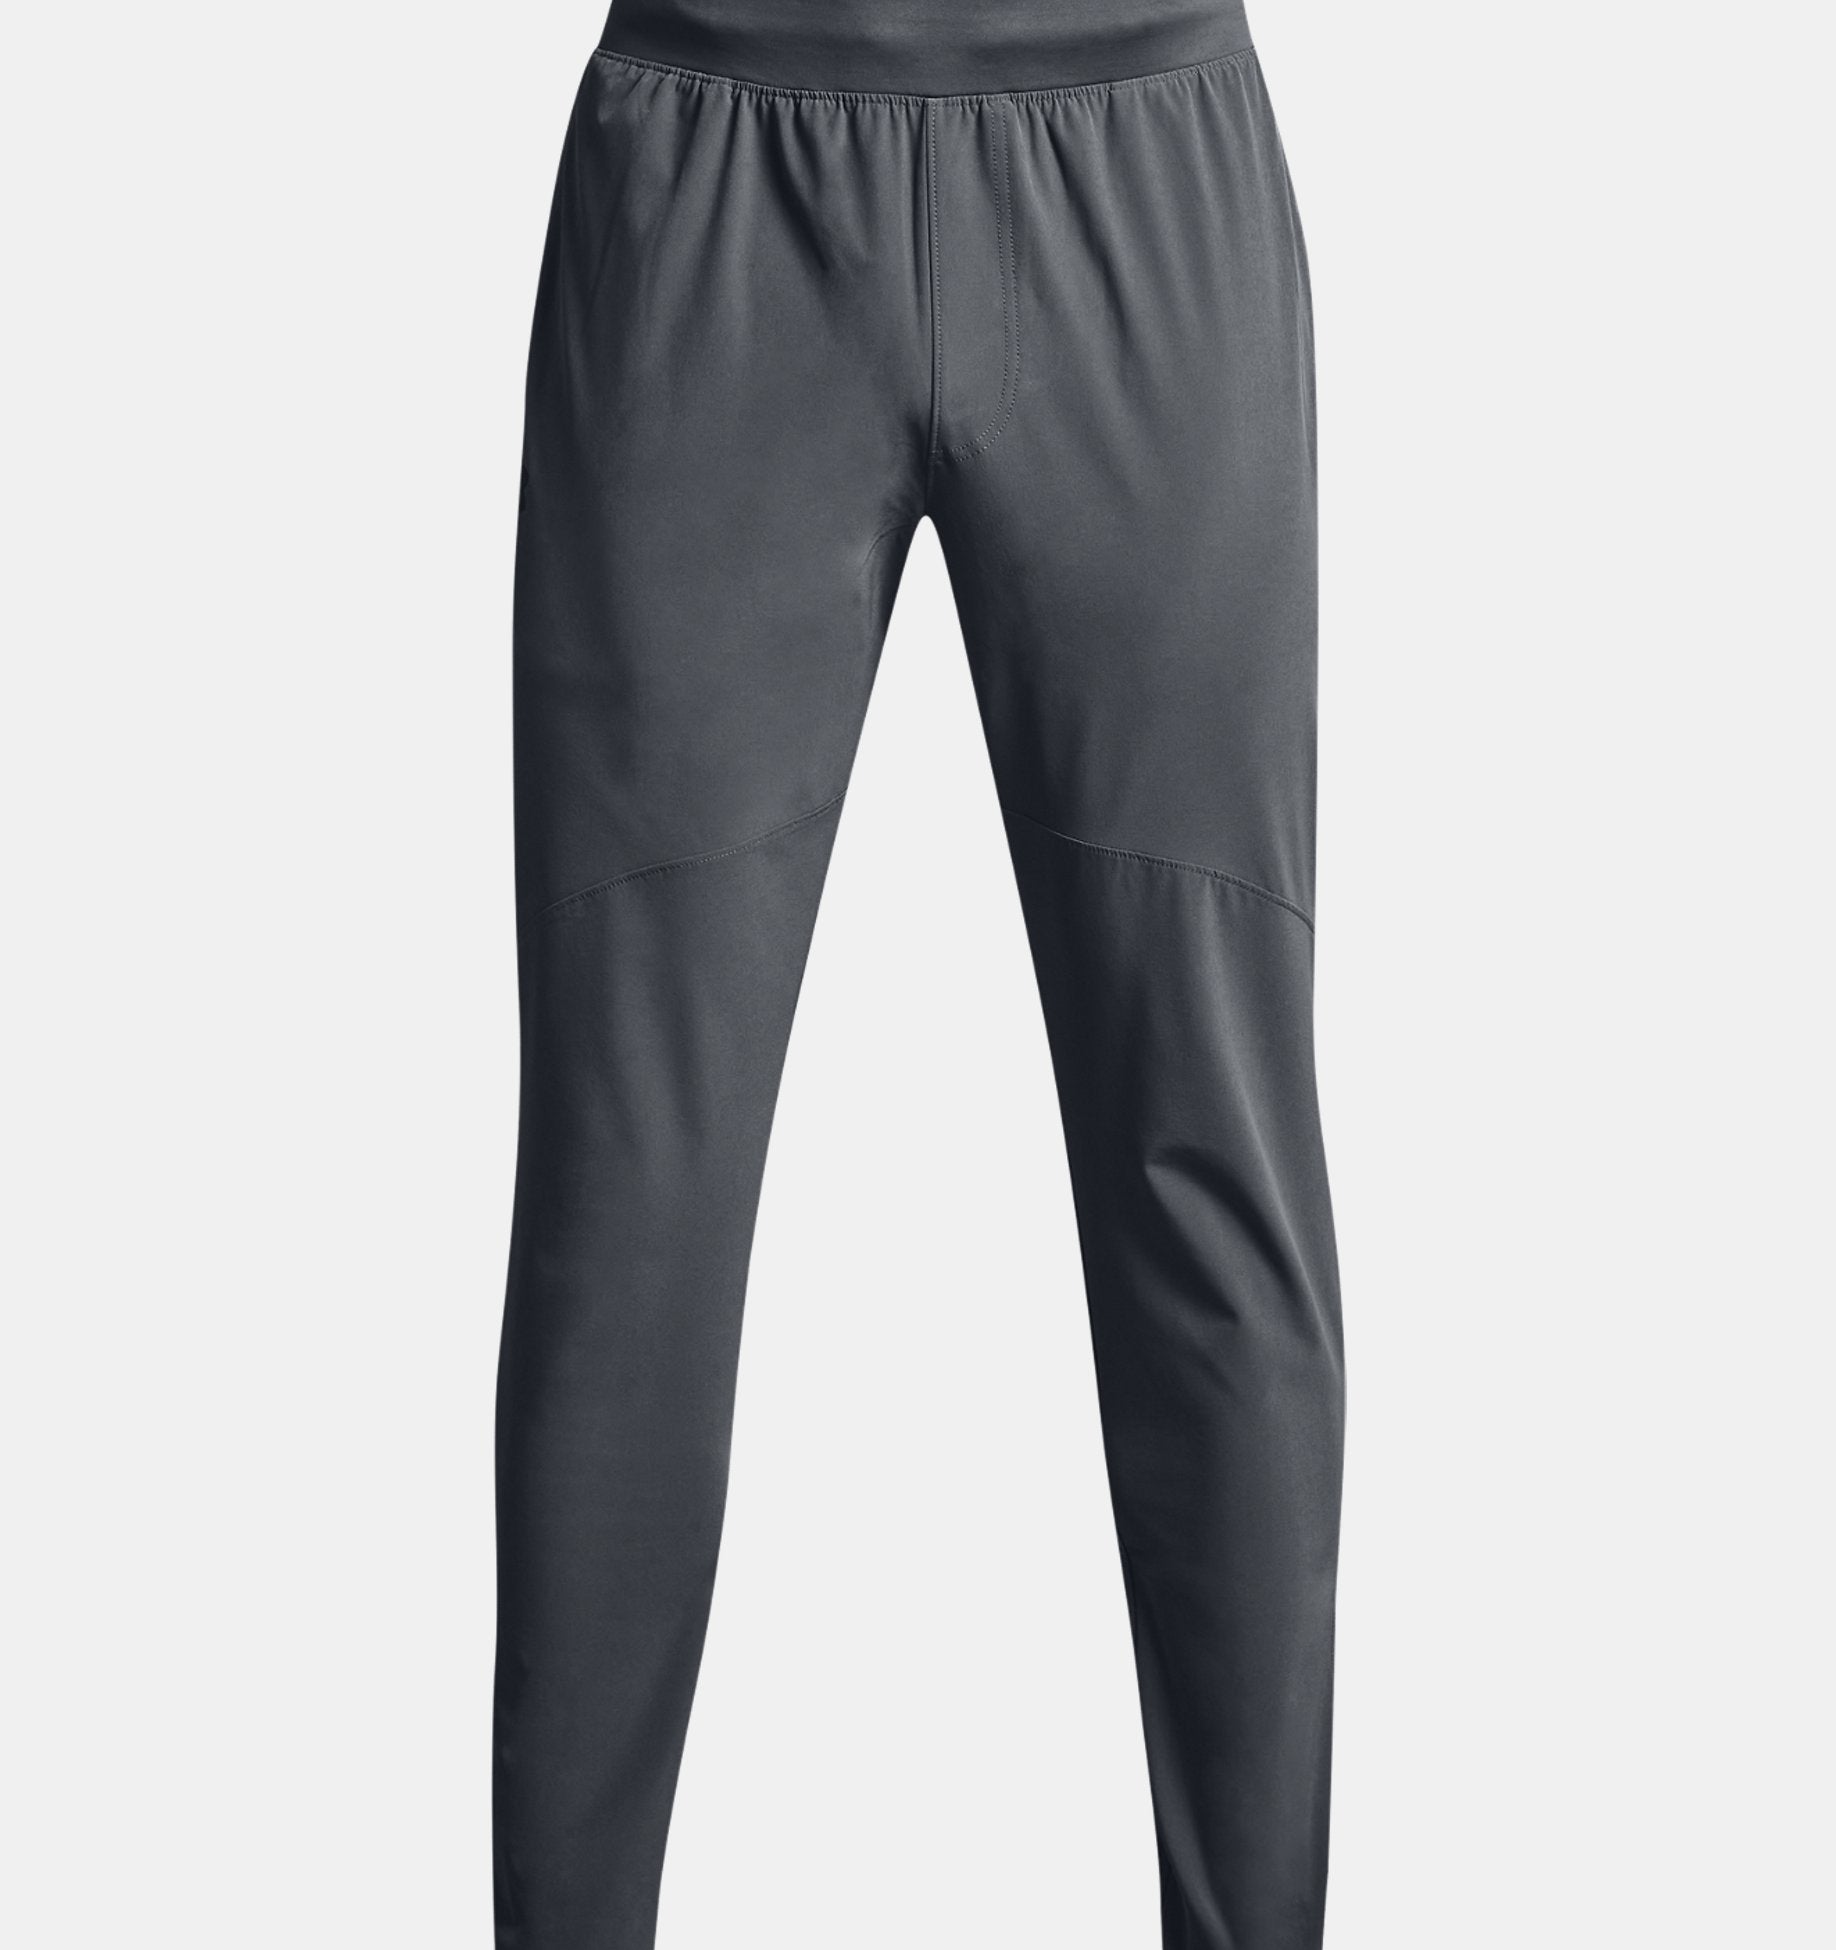 Under Armour Men's Stretch Woven Pants – Ernie's Sports Experts